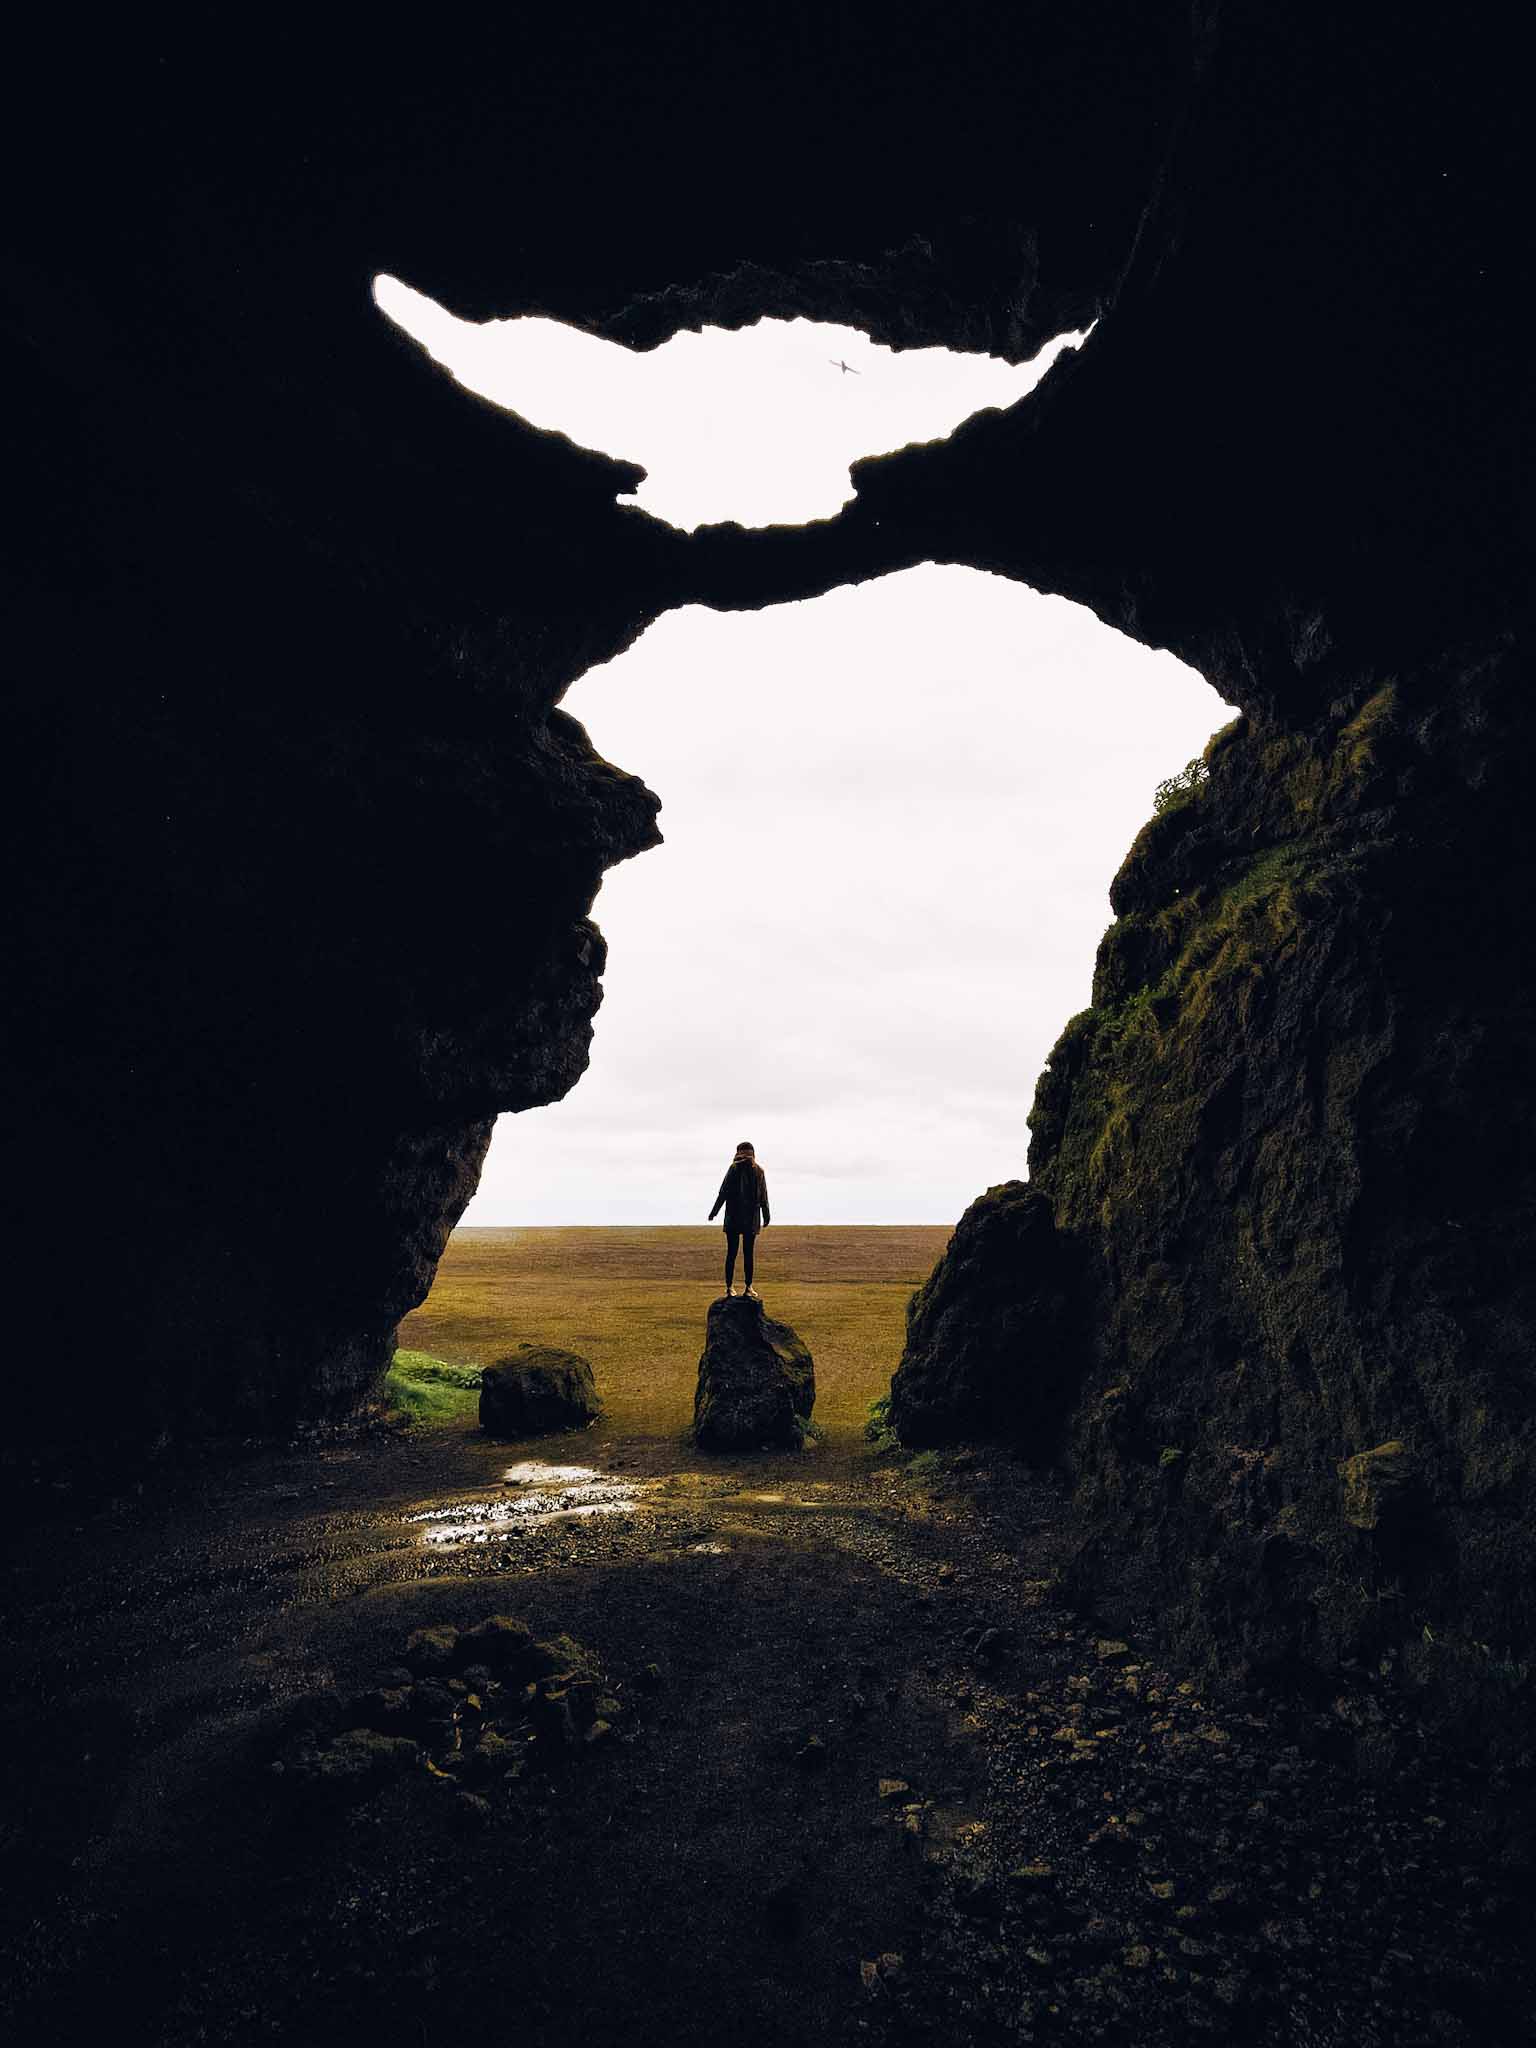 Unique spots and hidden gems - Yoda cave in Iceland